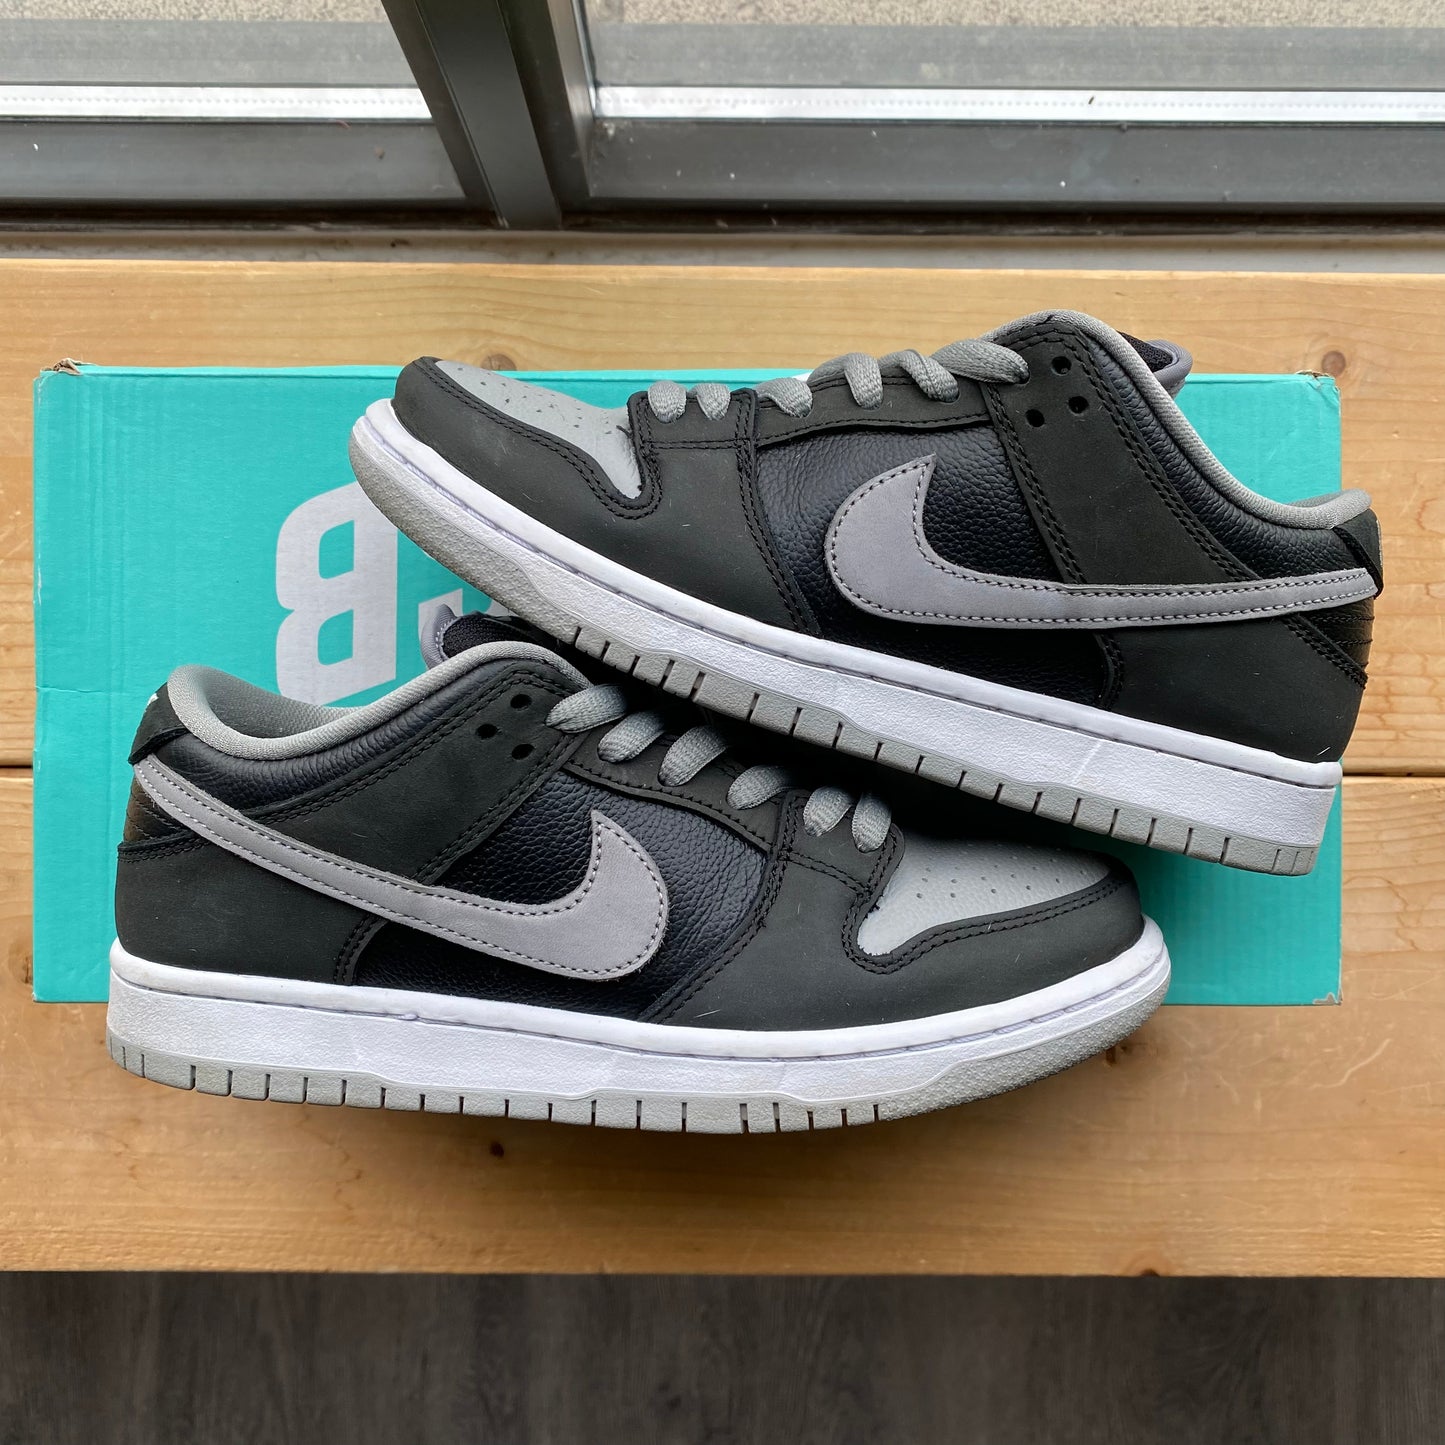 Nike SB Dunk Low "J-Pack Shadow" Size 6